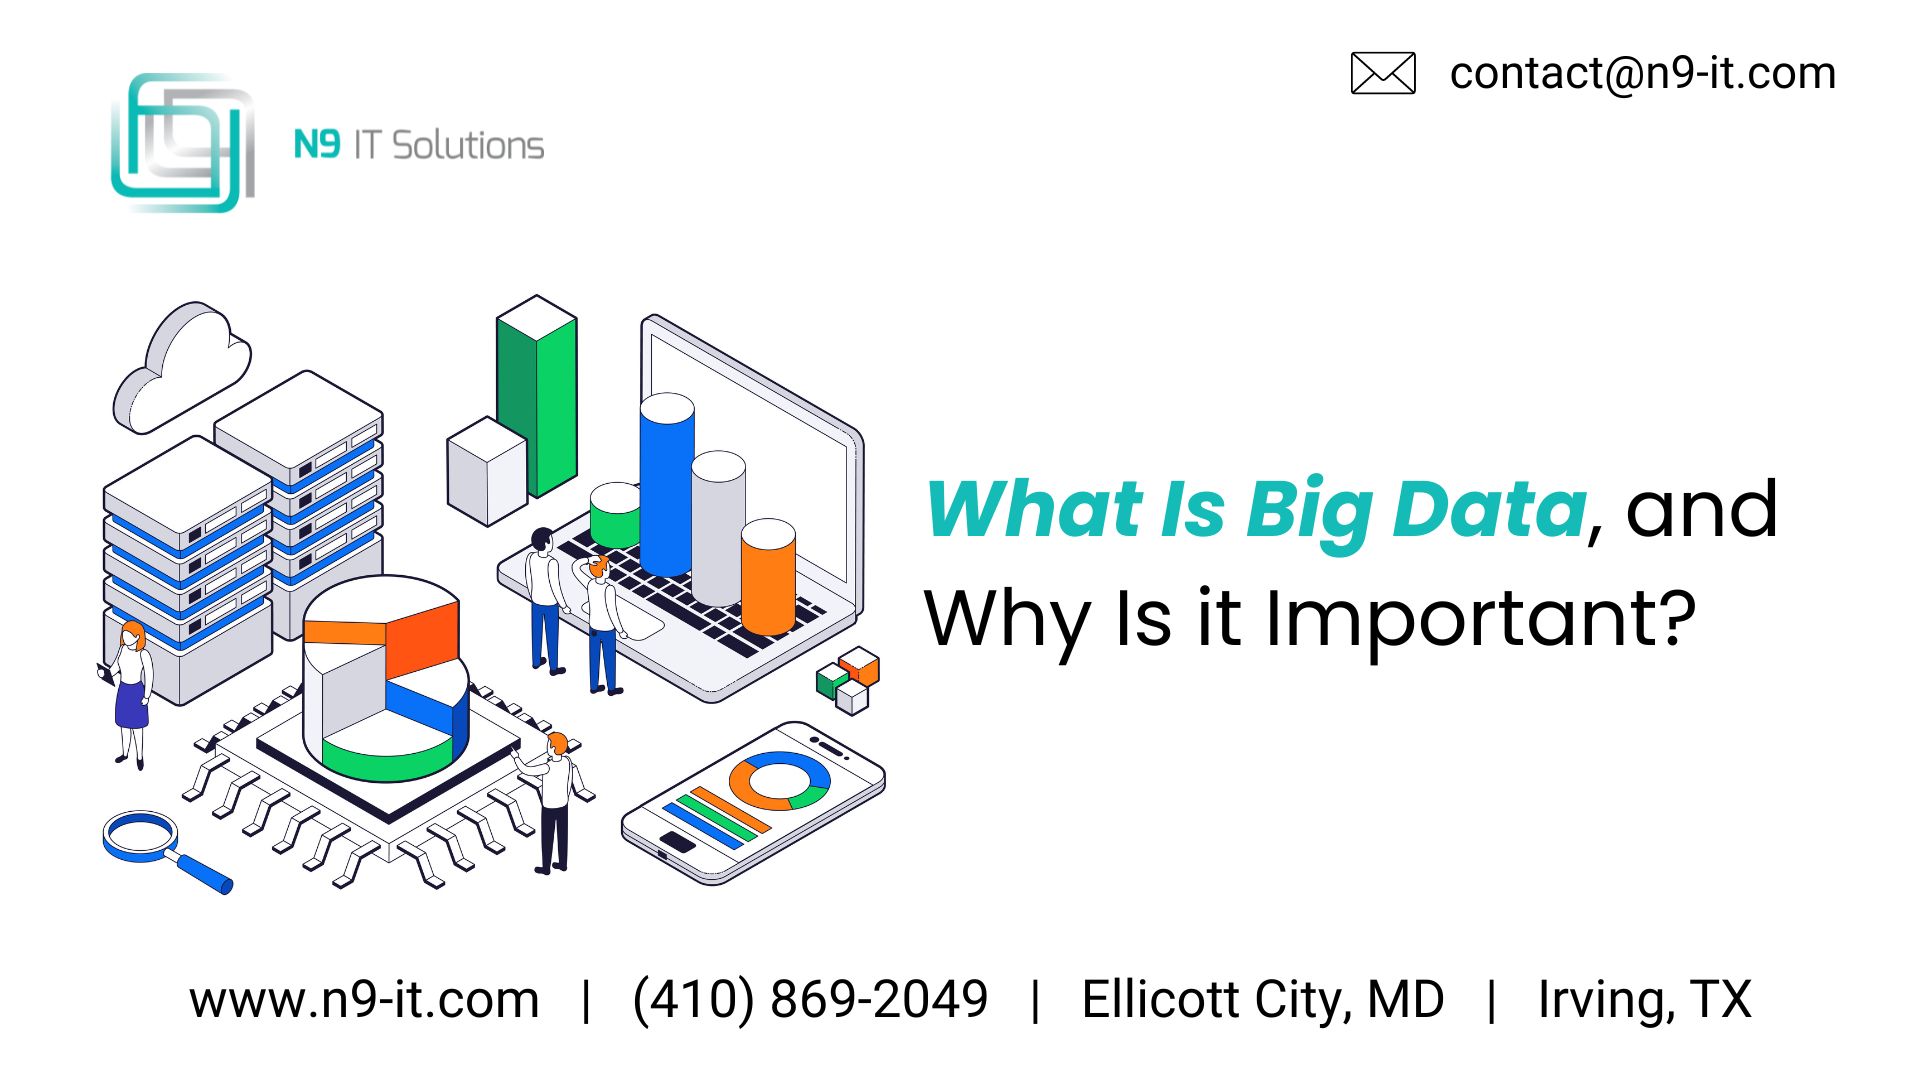 What Is Big Data, and Why Is it Important?